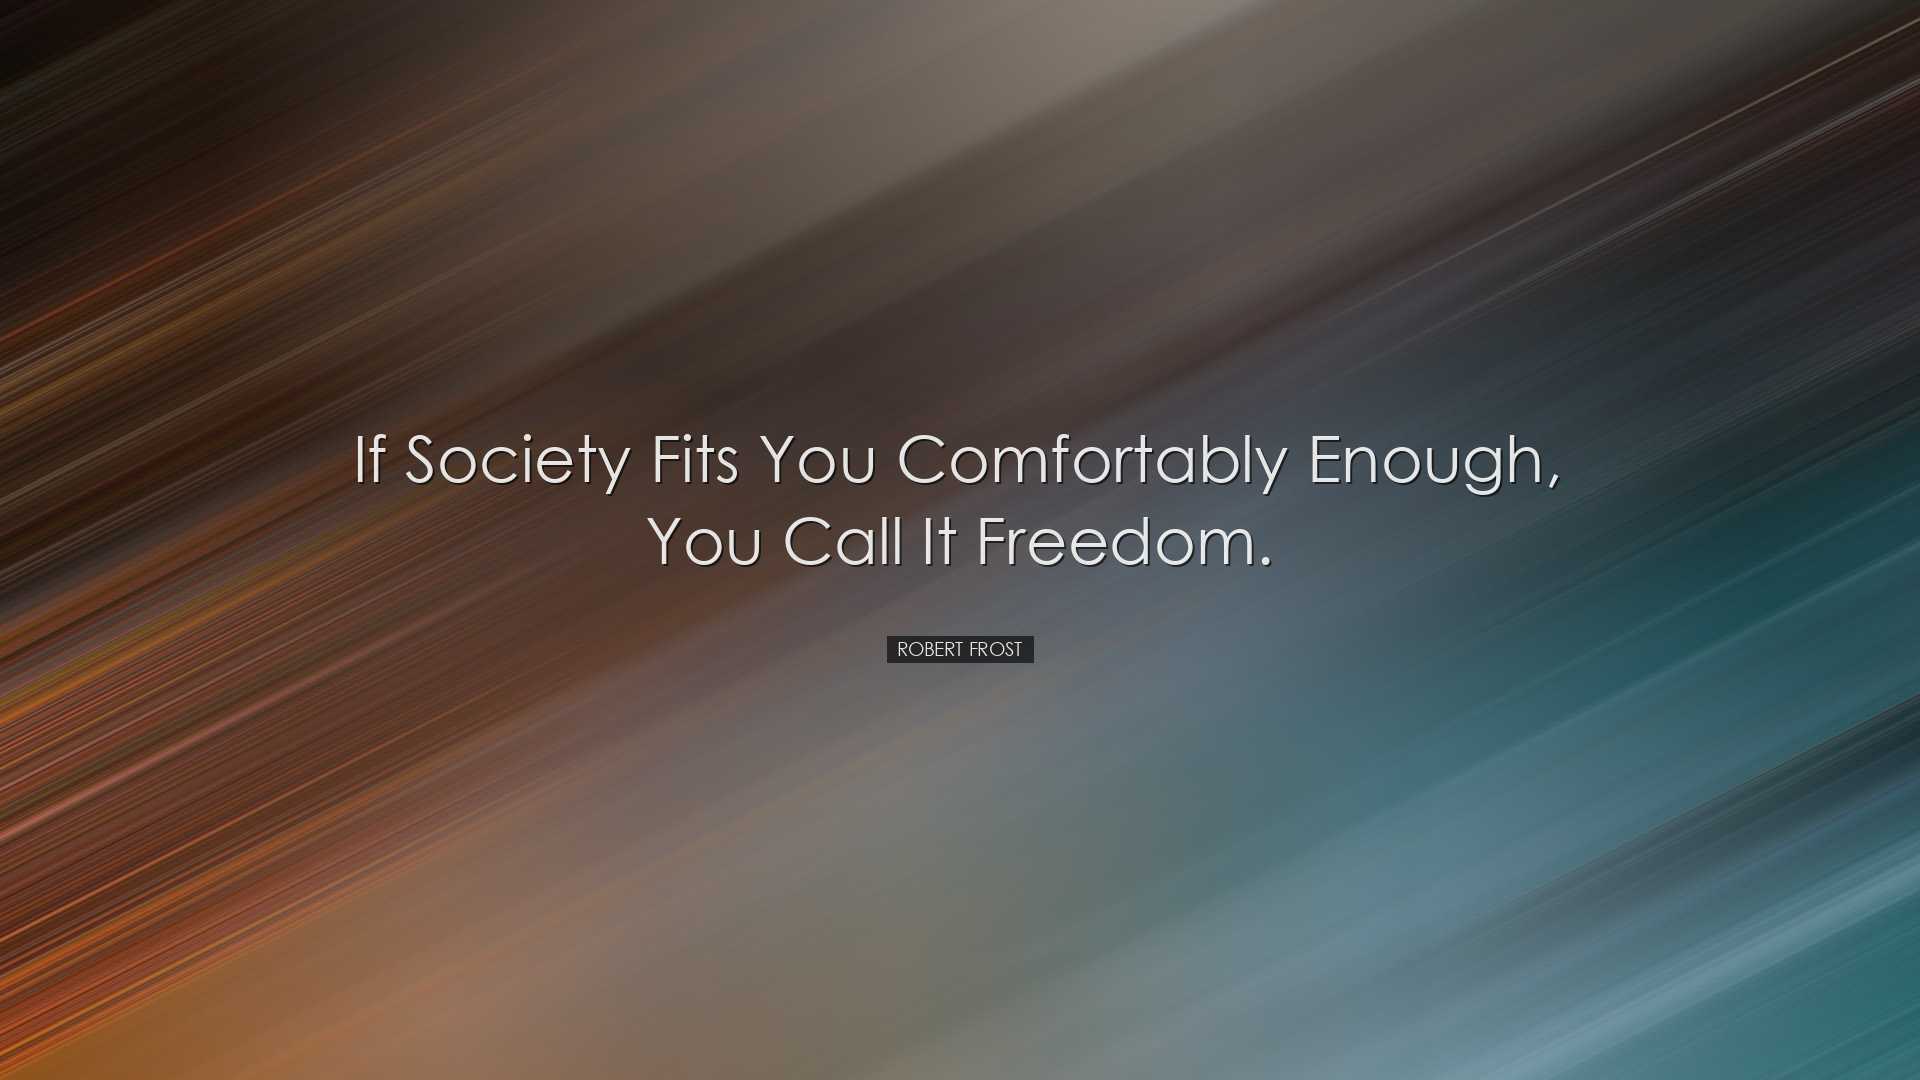 If society fits you comfortably enough, you call it freedom. - Rob